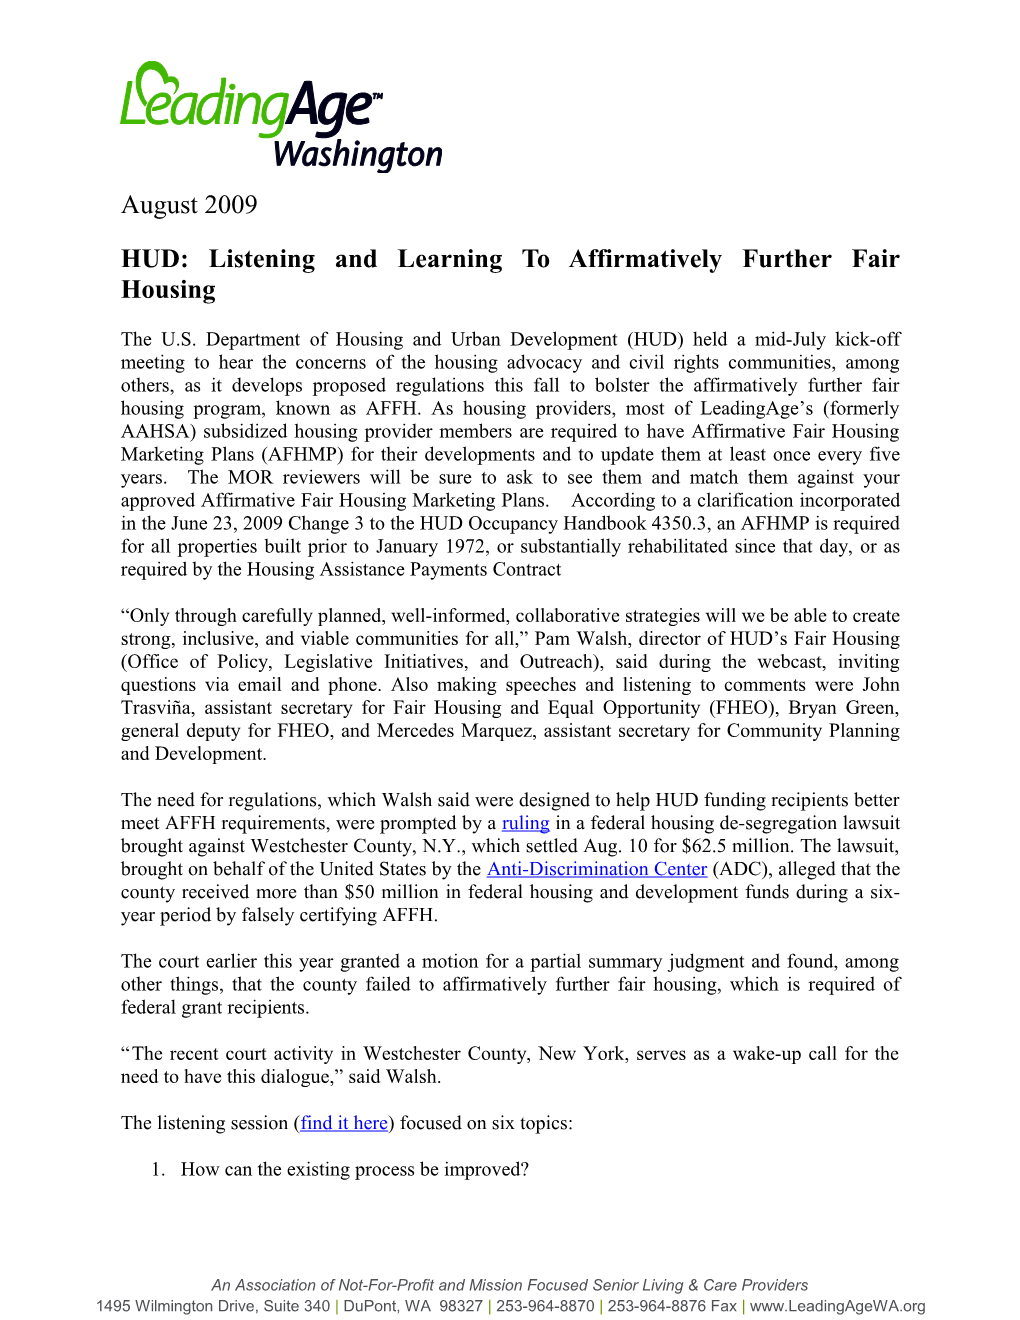 HUD: Listening and Learning to Affirmatively Further Fair Housing s1